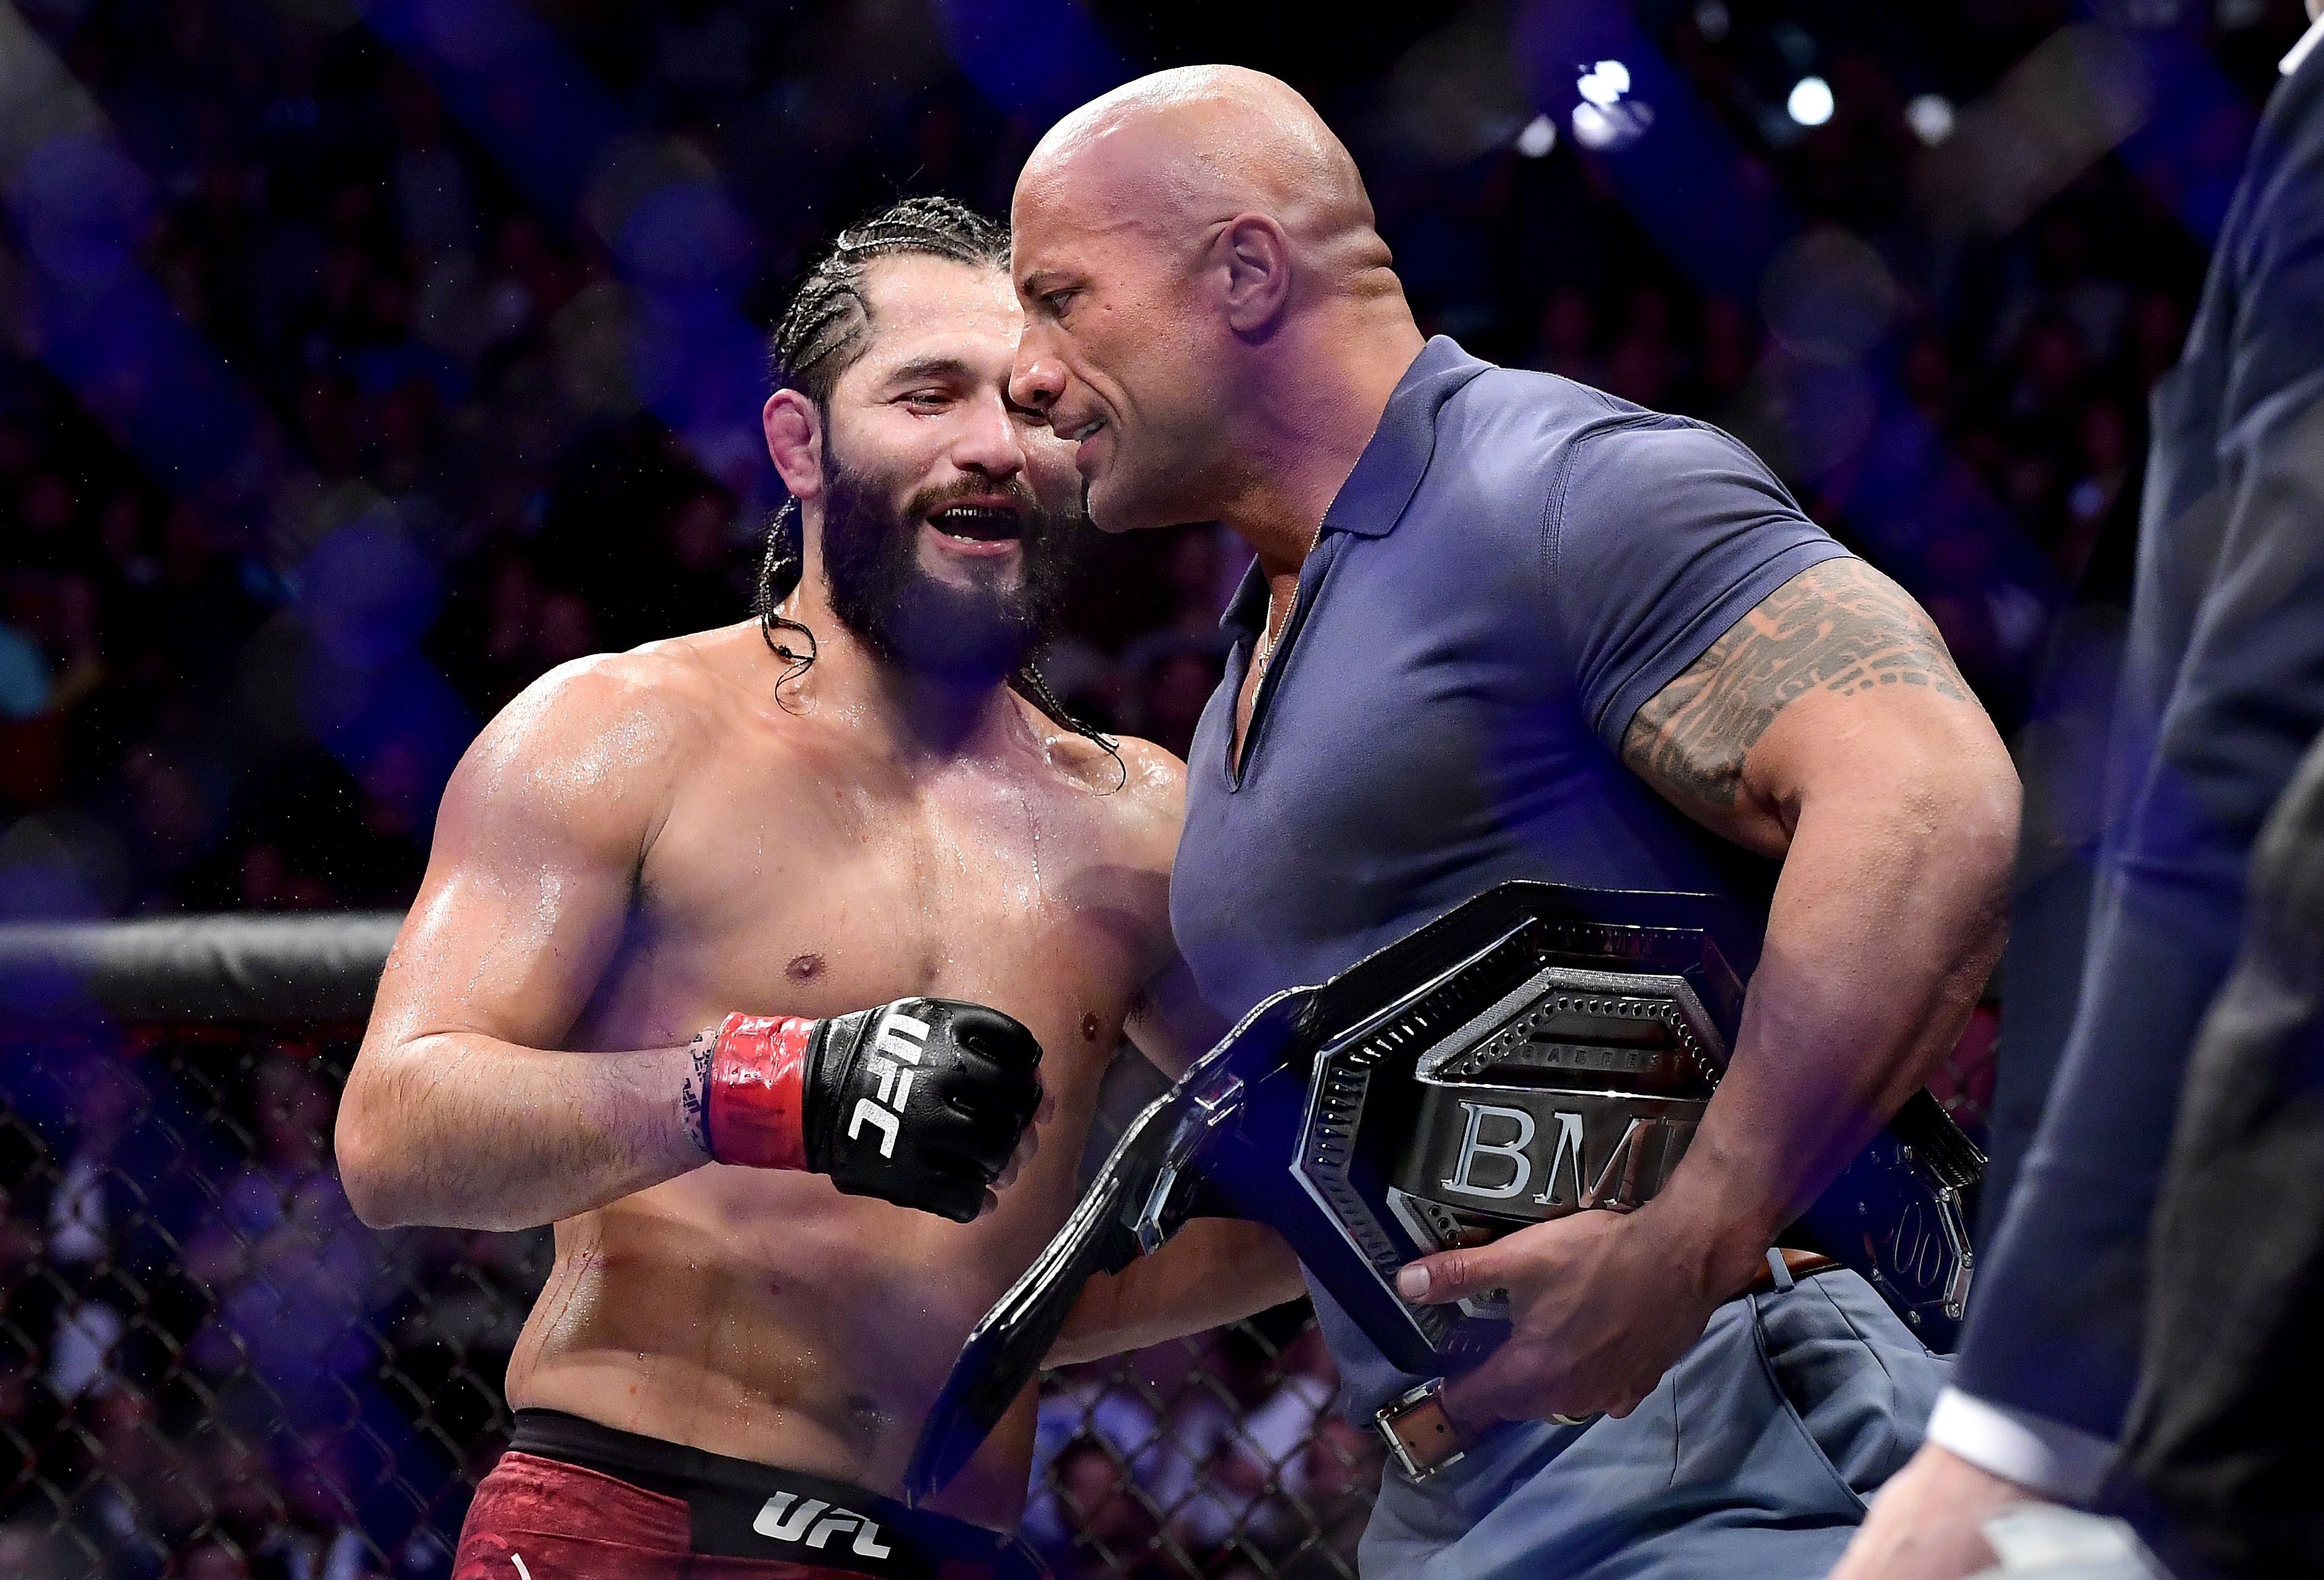 Jorge Masvidal with Dwayne ‘The Rock’ Johnson after his victory by TKO on a medical stoppage against Nate Diaz at UFC 244. Photo: AFP